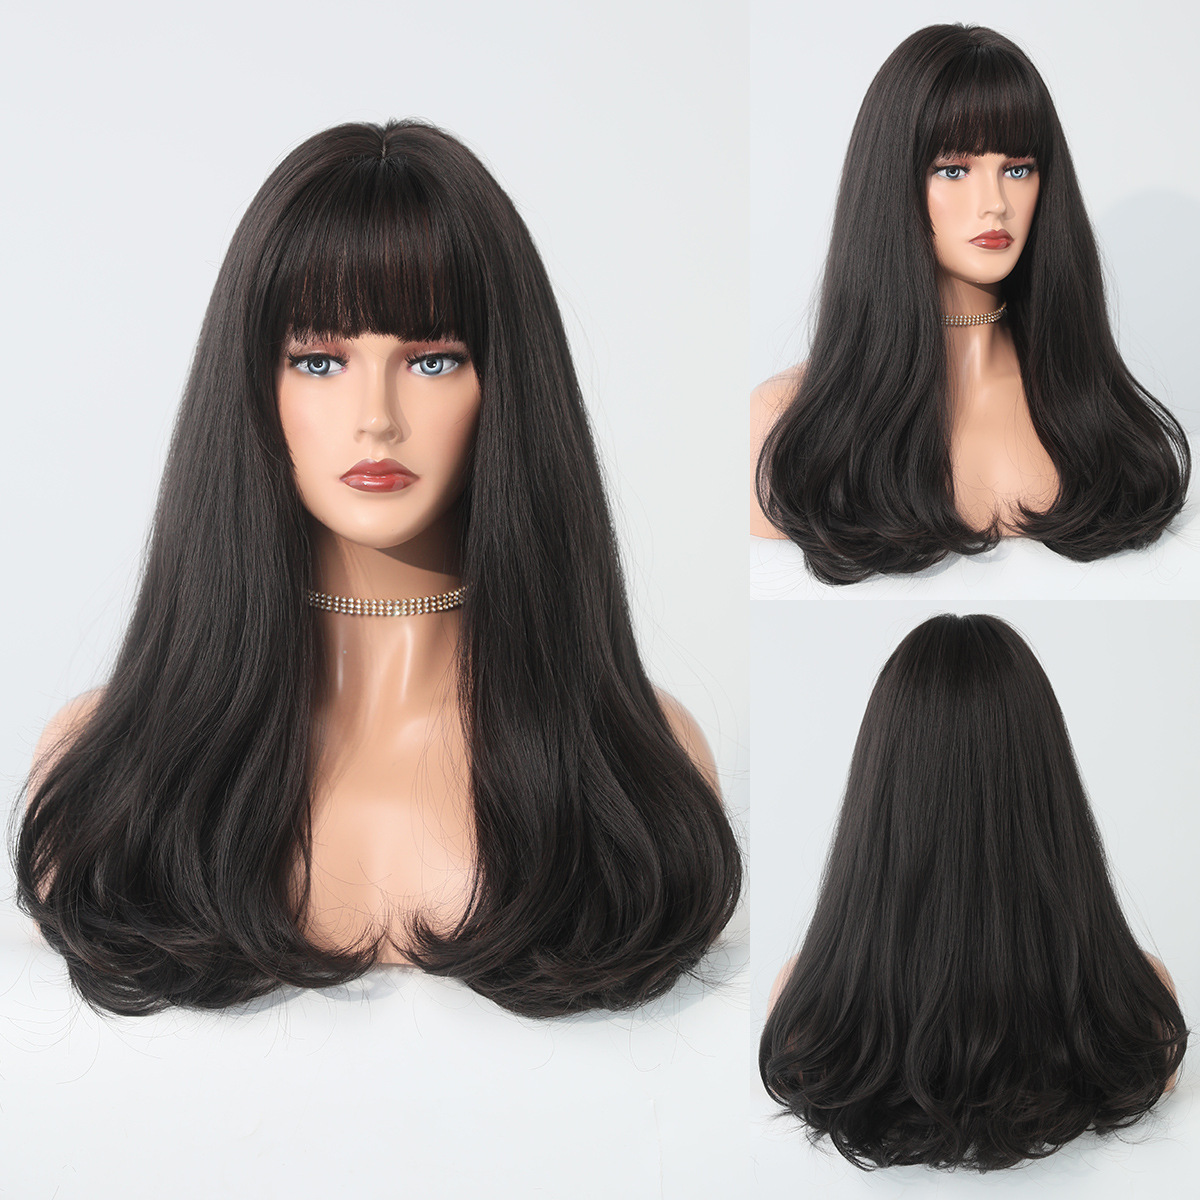 A set including a platinum blonde long curly wig, designed for fashionable women looking for a daily or Christmas wig set